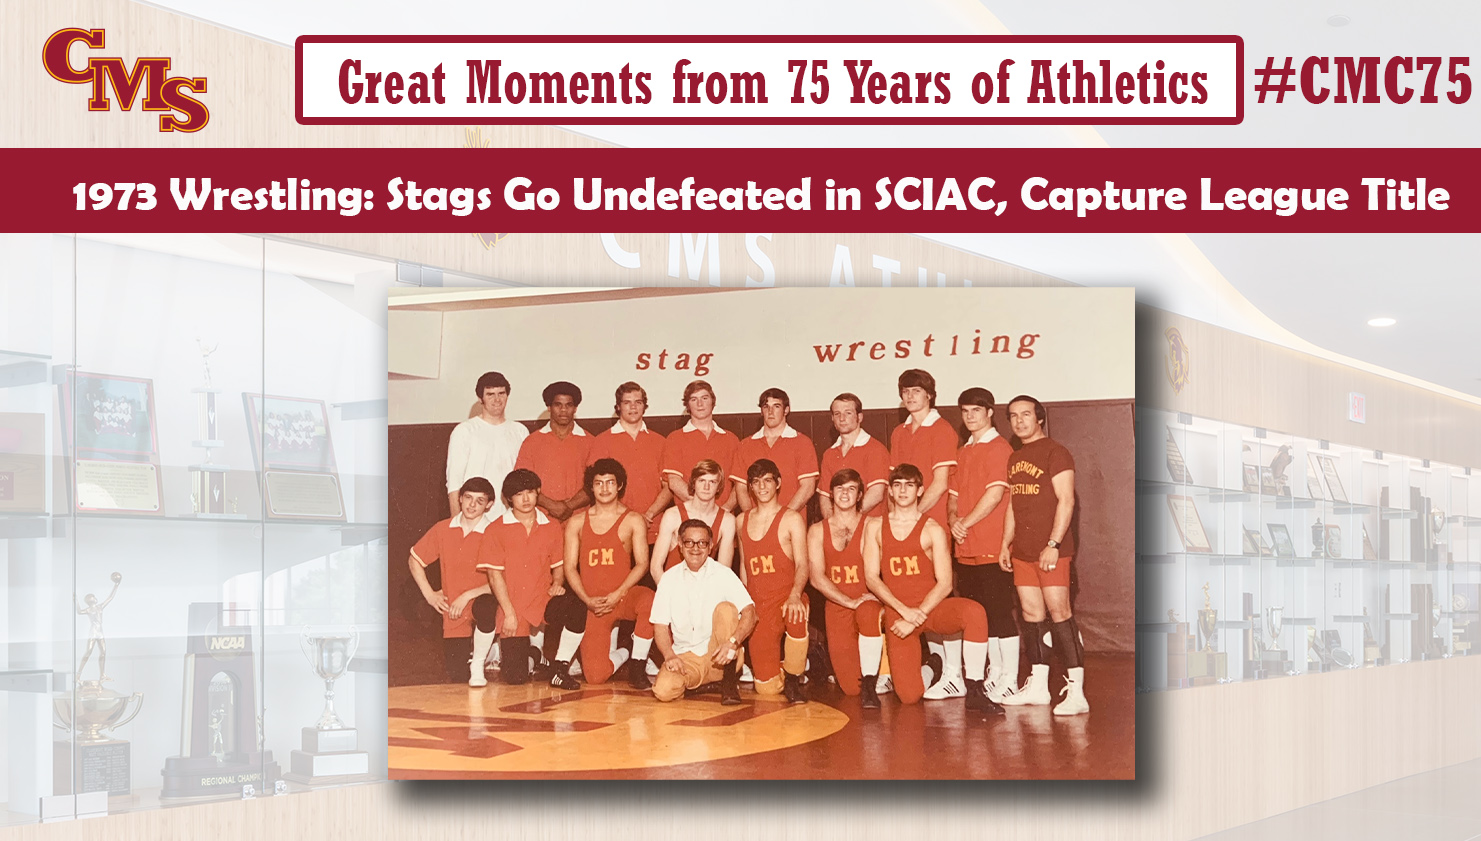 The 1973 wrestling team. Words over the photo read: Great Moments from 75 Years of Athletics, 1973 Wrestling: Stags go Undefeated in SCIAC, Capture League Title